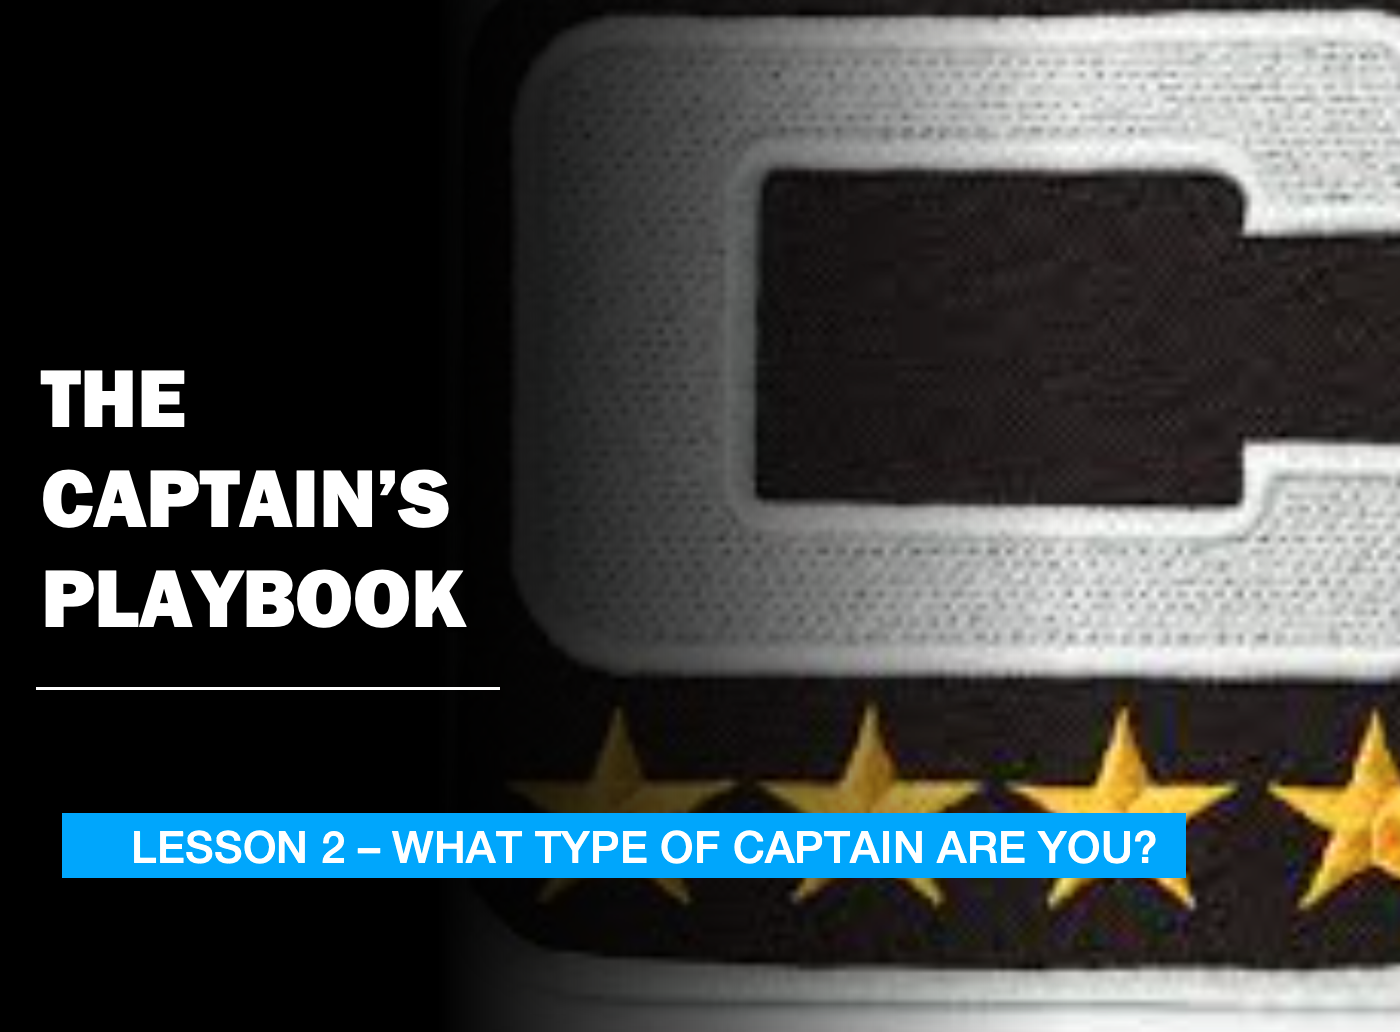 THE CAPTAIN'S PLAYBOOK - LESSON 2